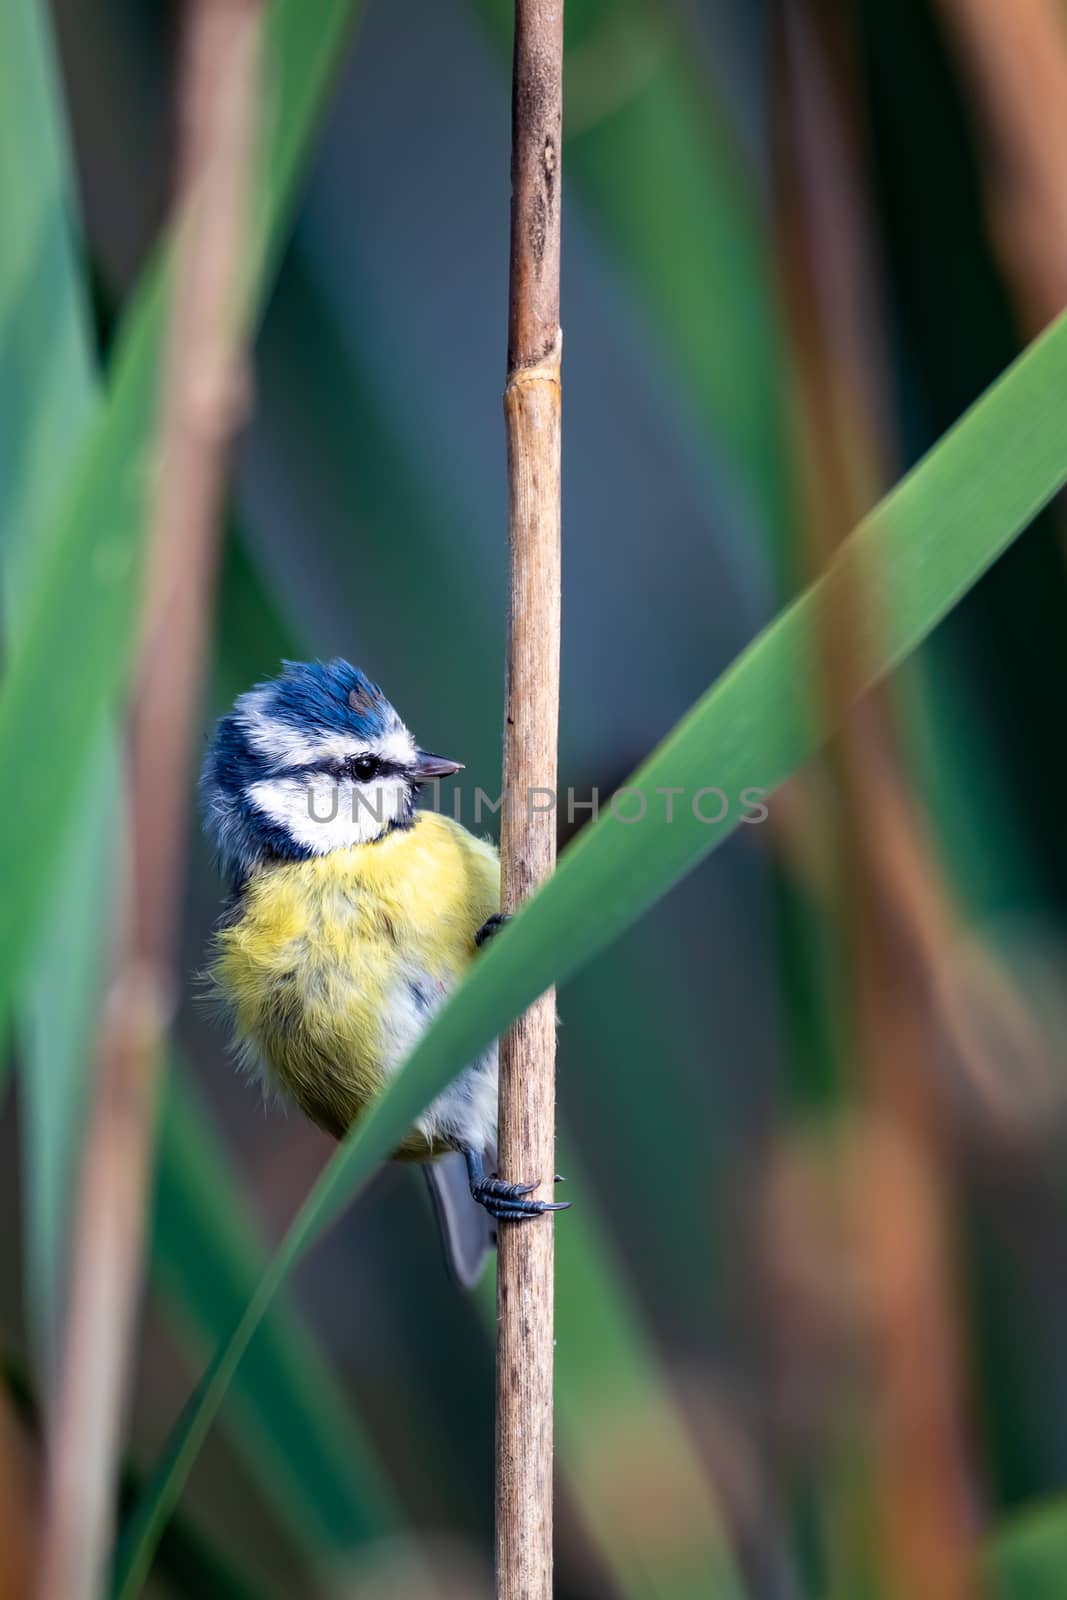 common bird Eurasian blue tit, Cyanistes caeruleus, in the nature on spring, perched on reed. Czech Republic wildlife